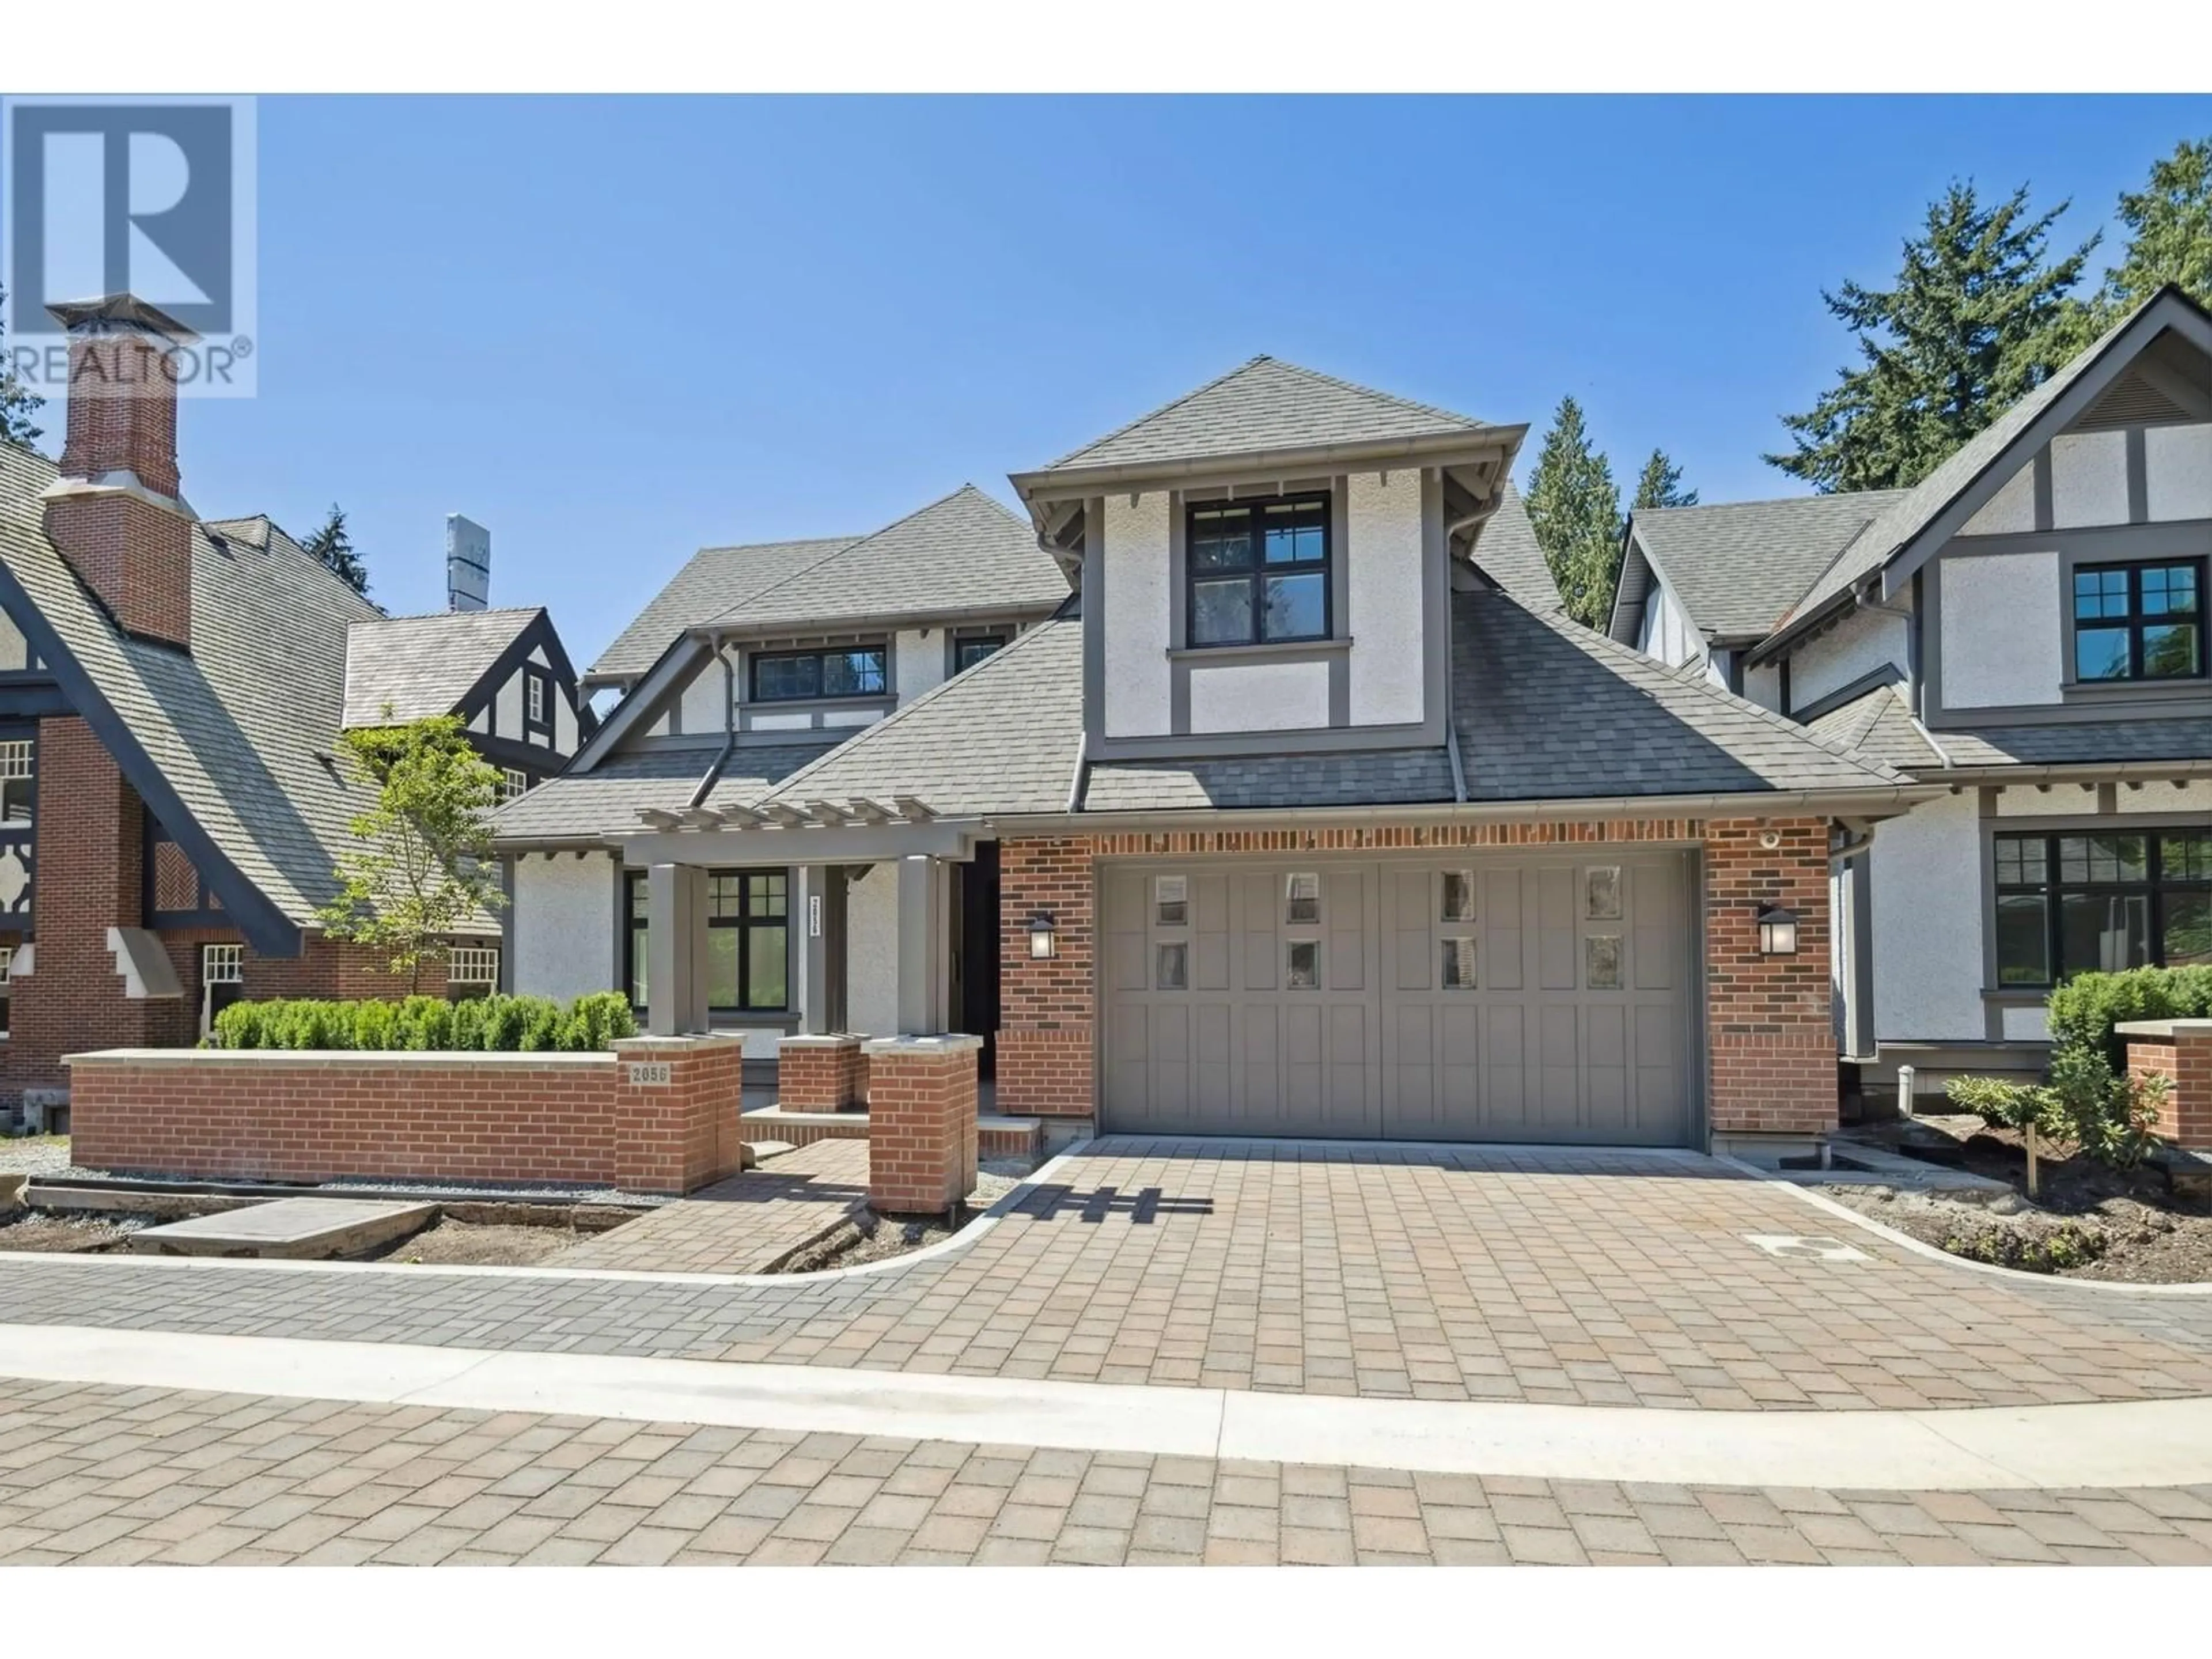 Home with brick exterior material for 2056 SW MARINE DRIVE, Vancouver British Columbia V6P6B5